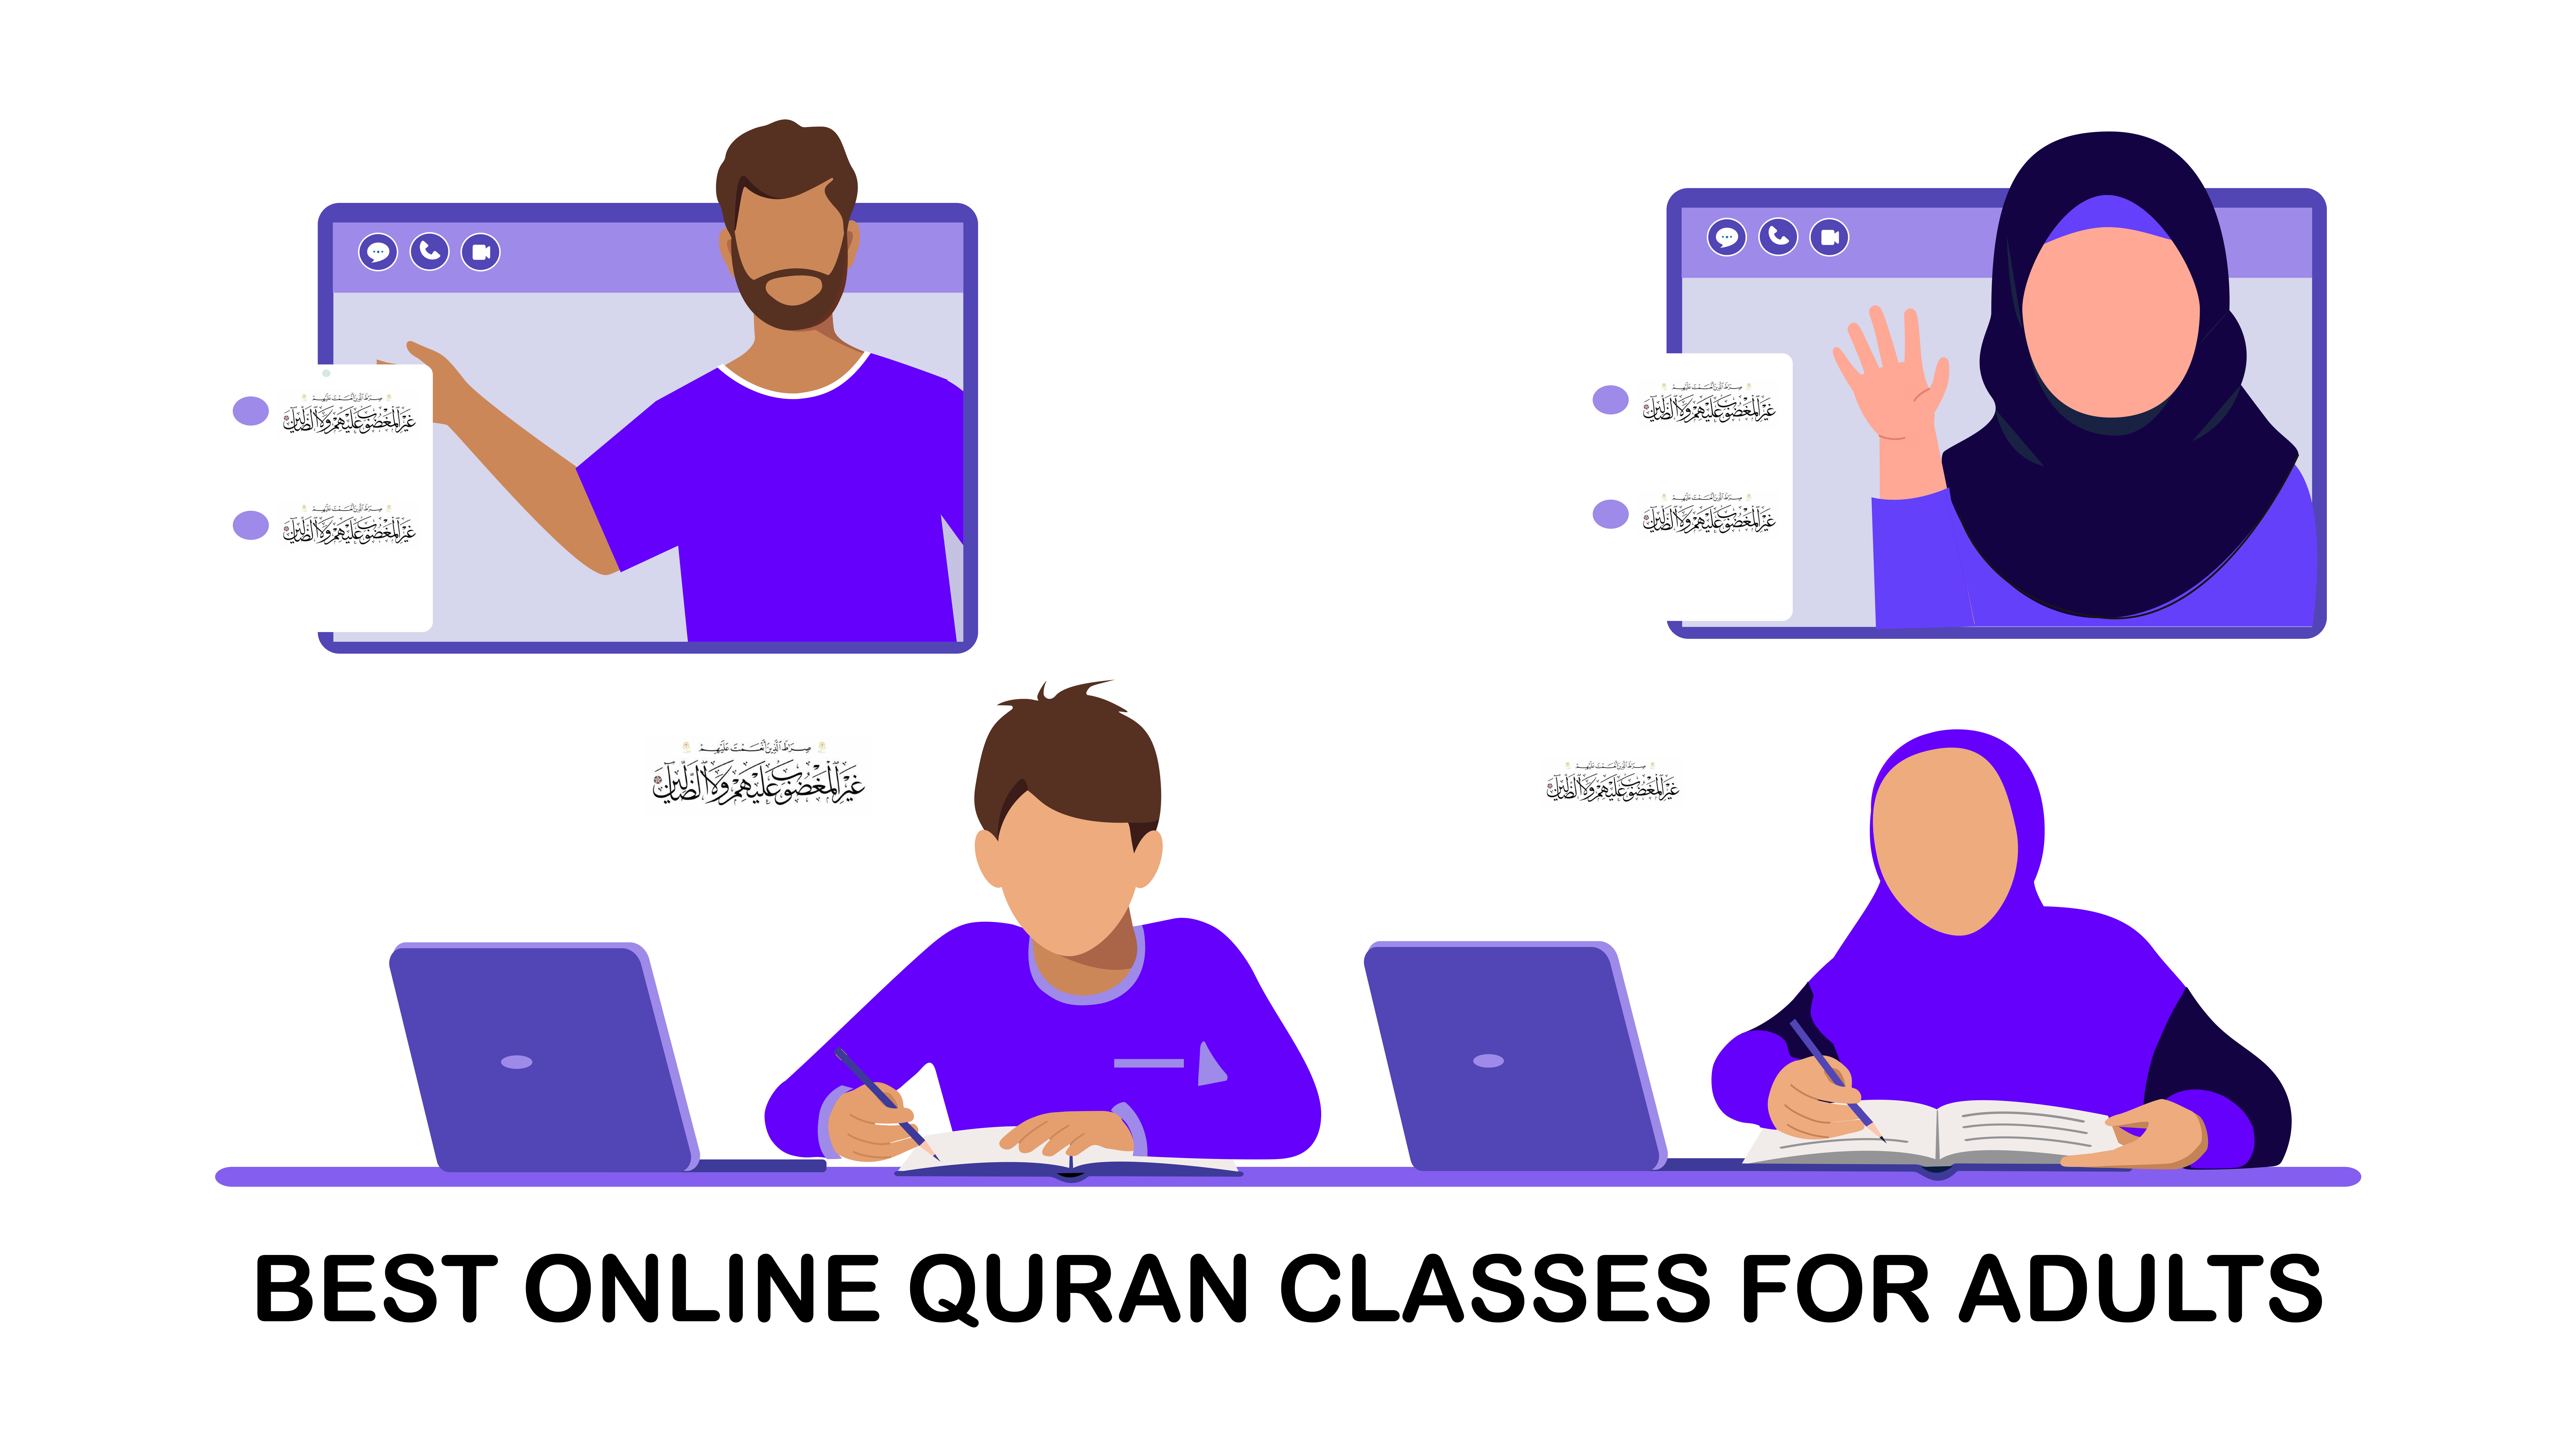 Quran classes online for Adults